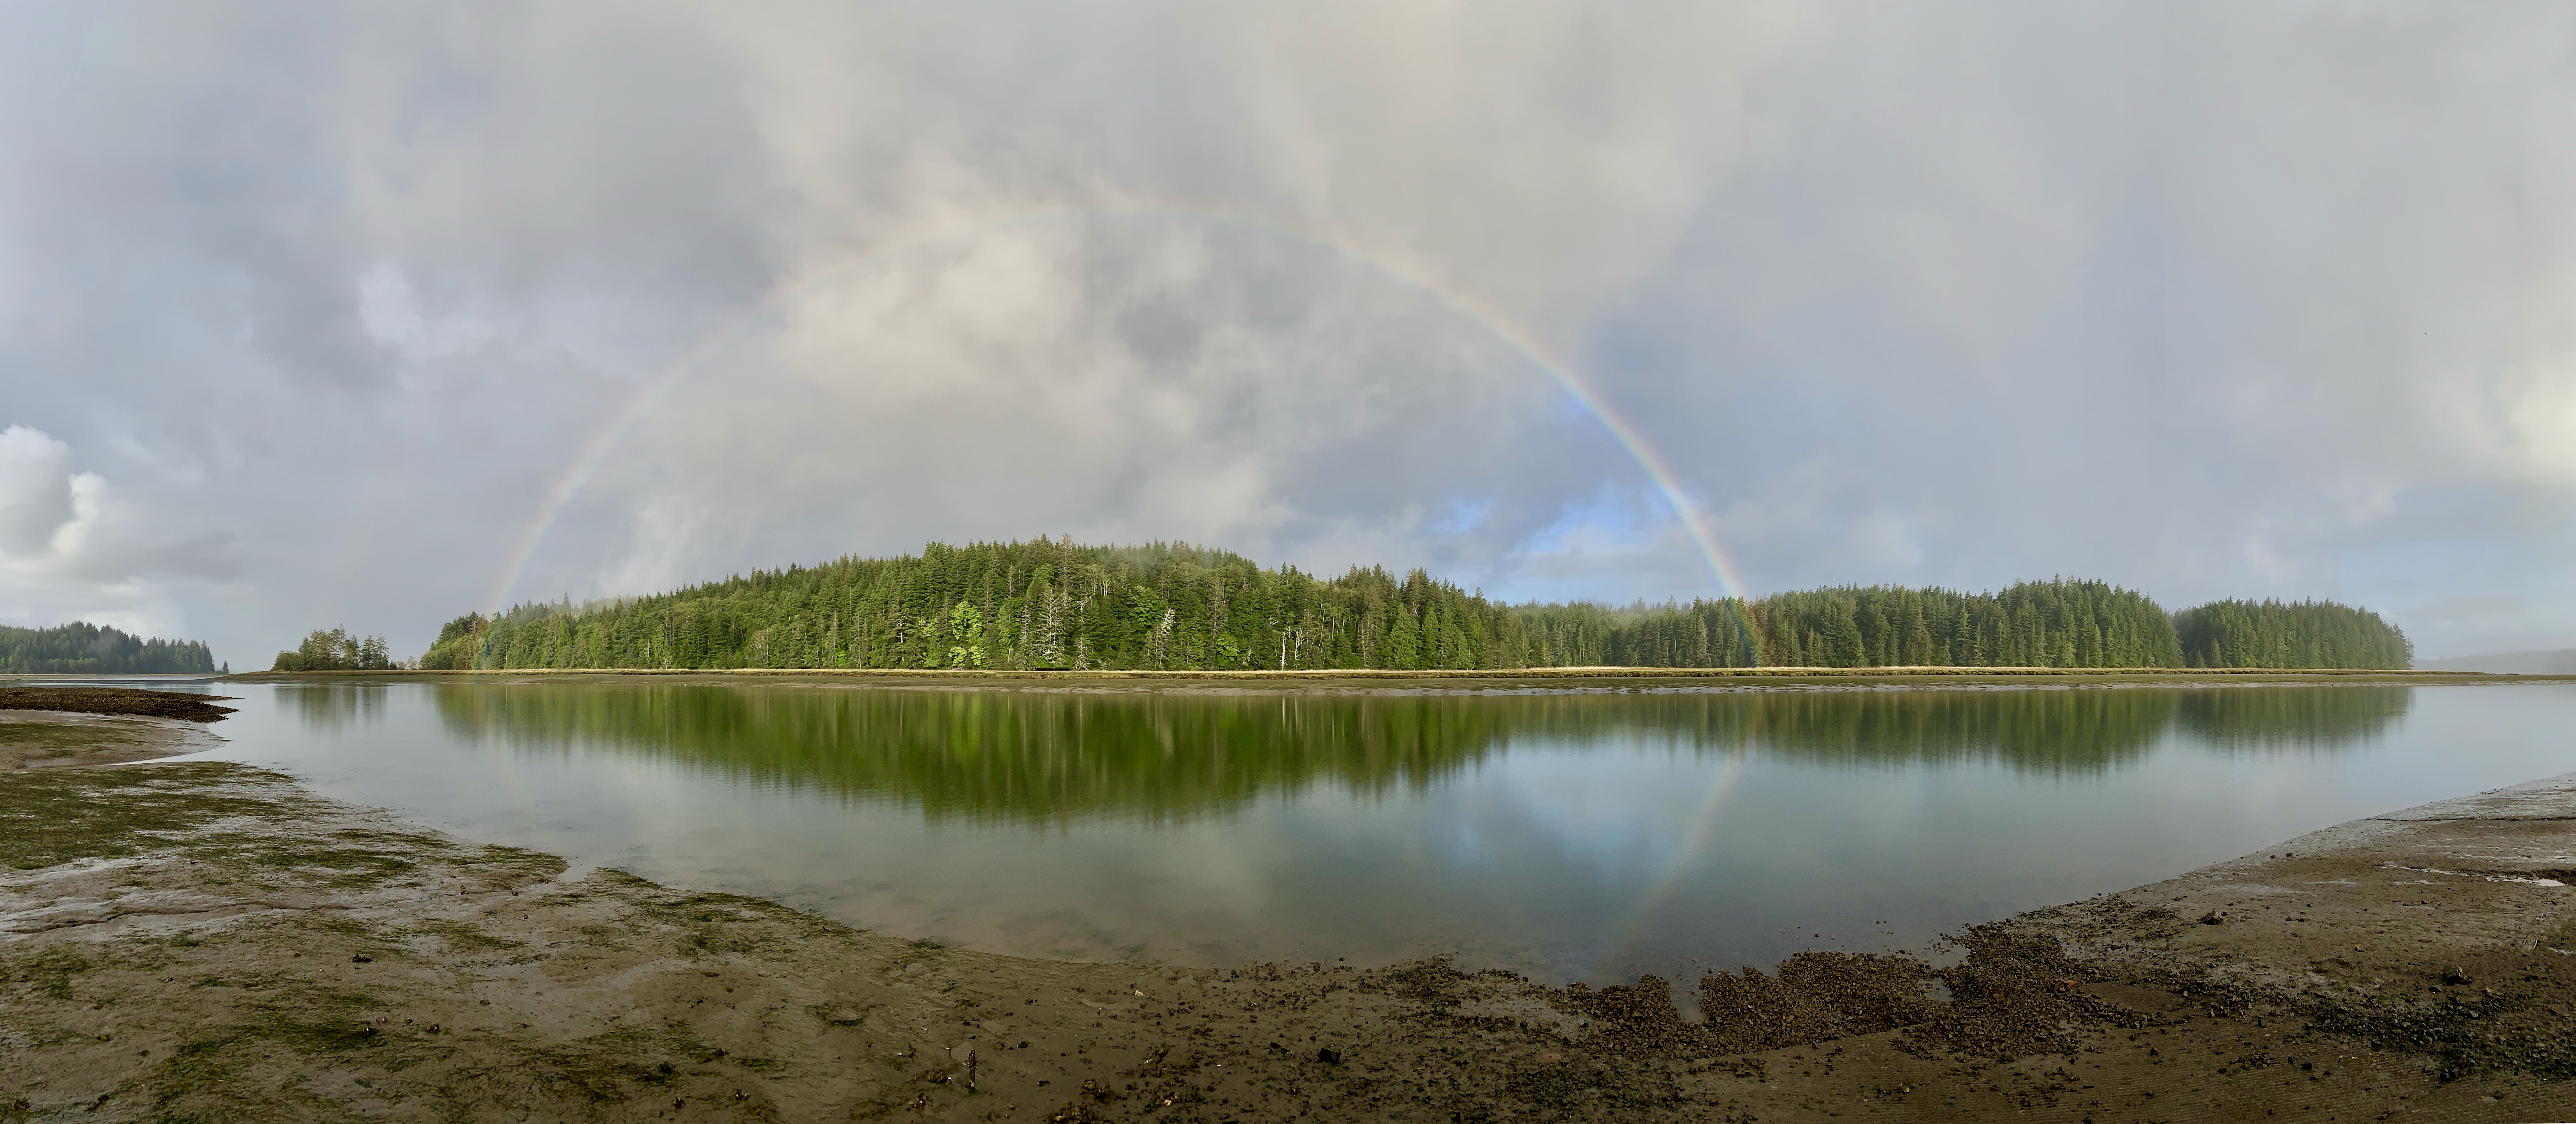 A rainbow stretches over a group o green trees on the bank of a bay